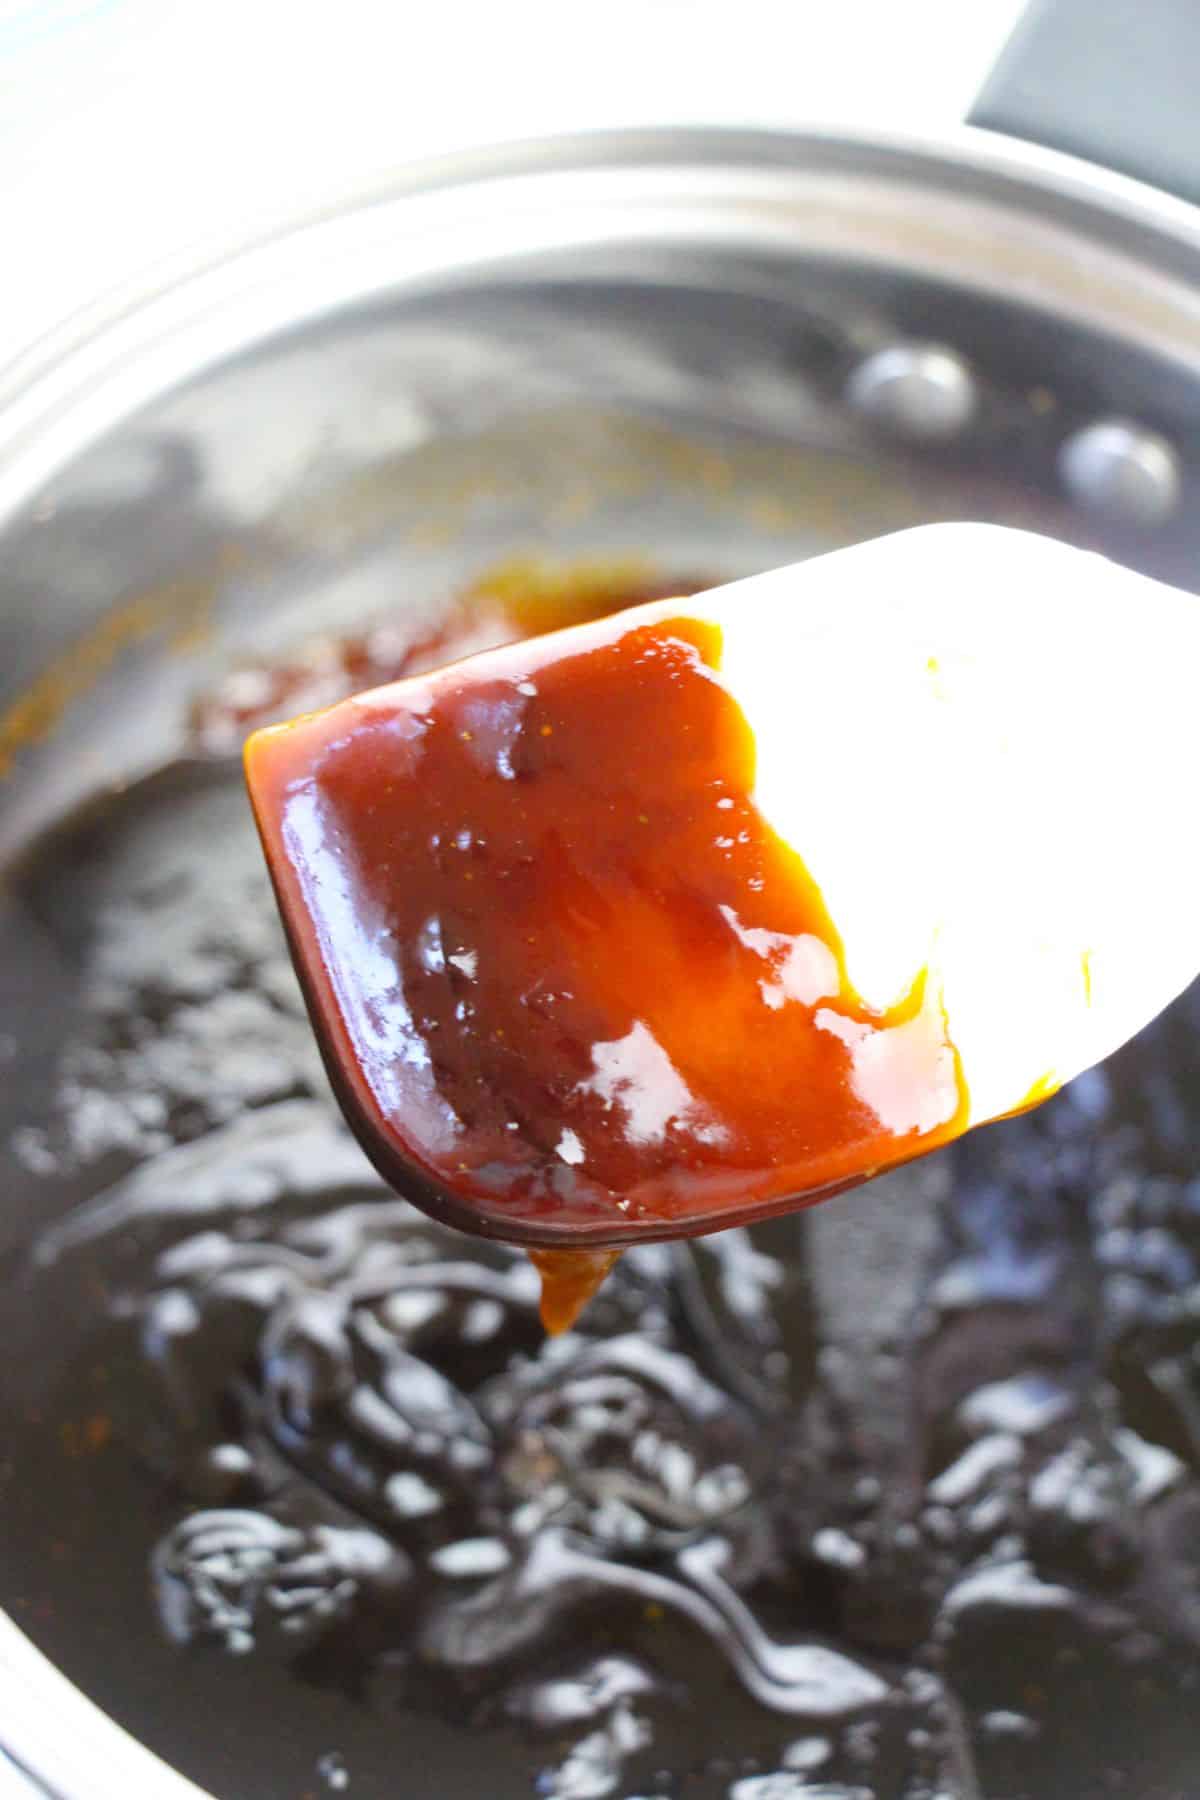 Sauce mixture in a small saucepan with spoon coated with sauce above the pan.